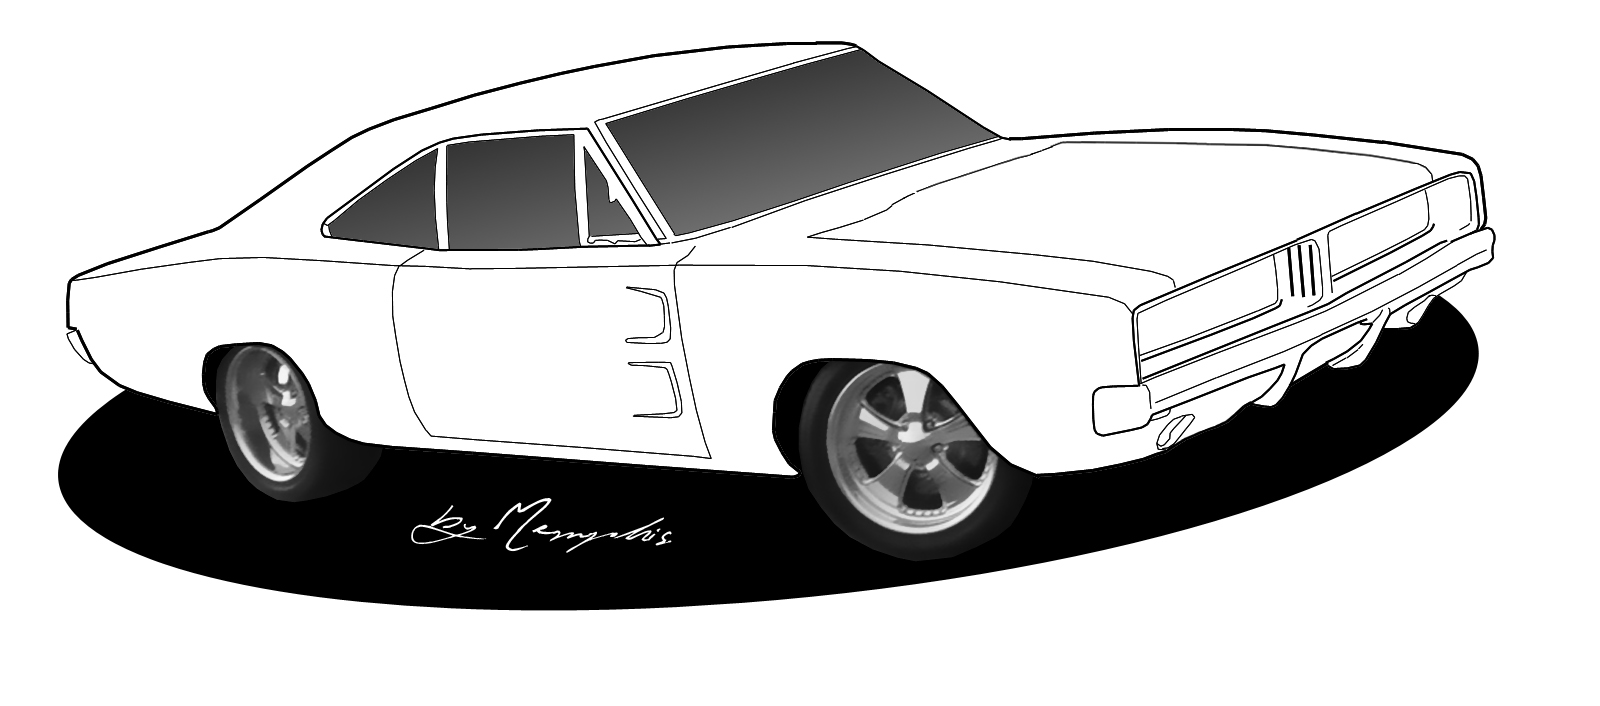 Muscle car drawing clipart